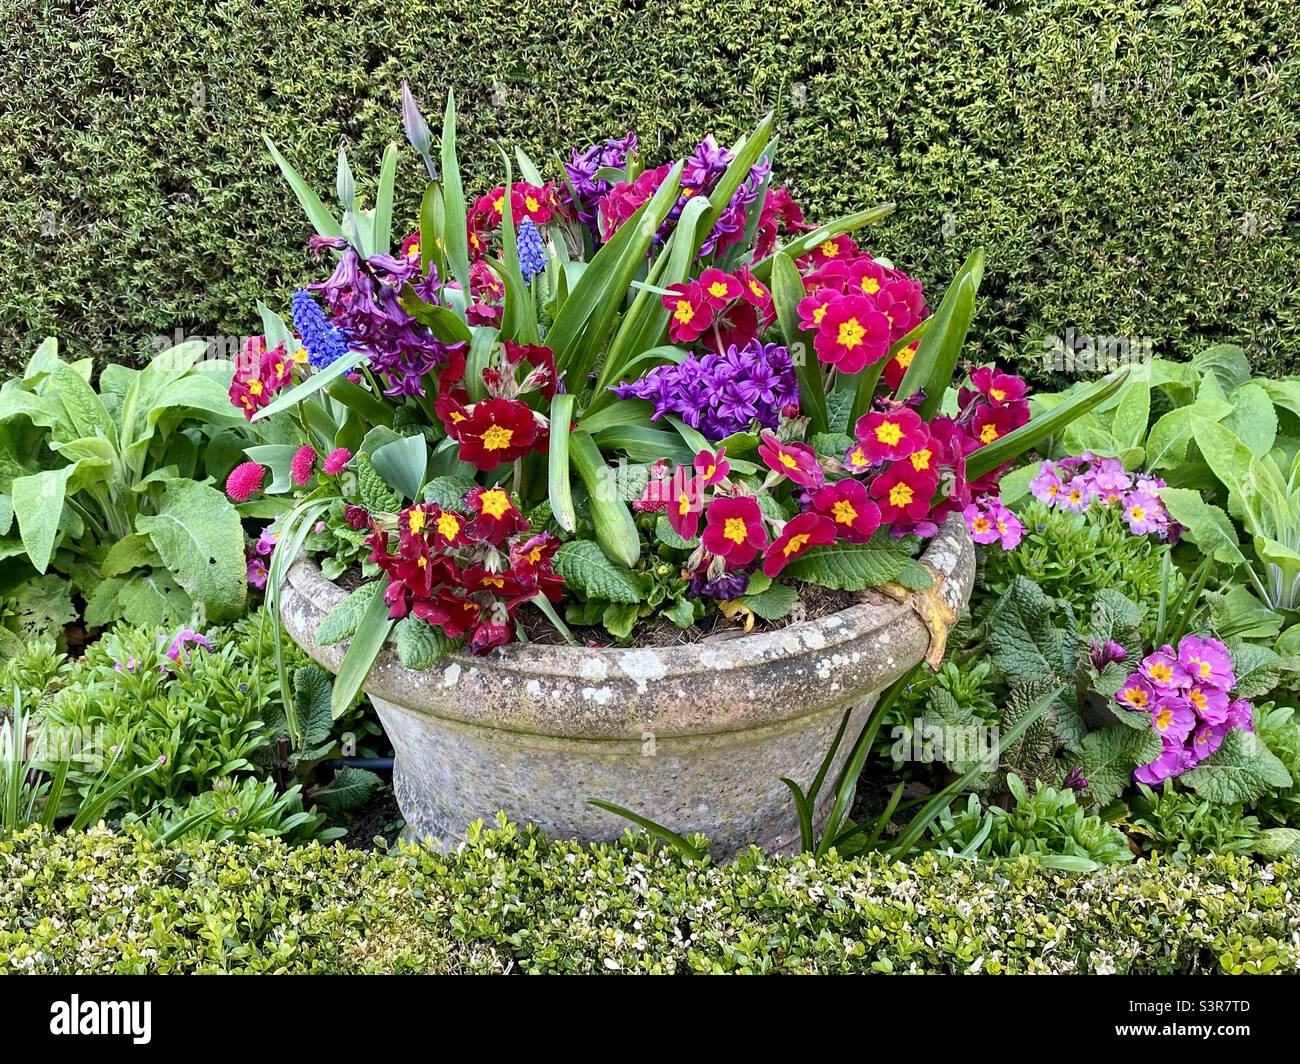 Colourful spring flowers in a stone flower pot Stock Photo